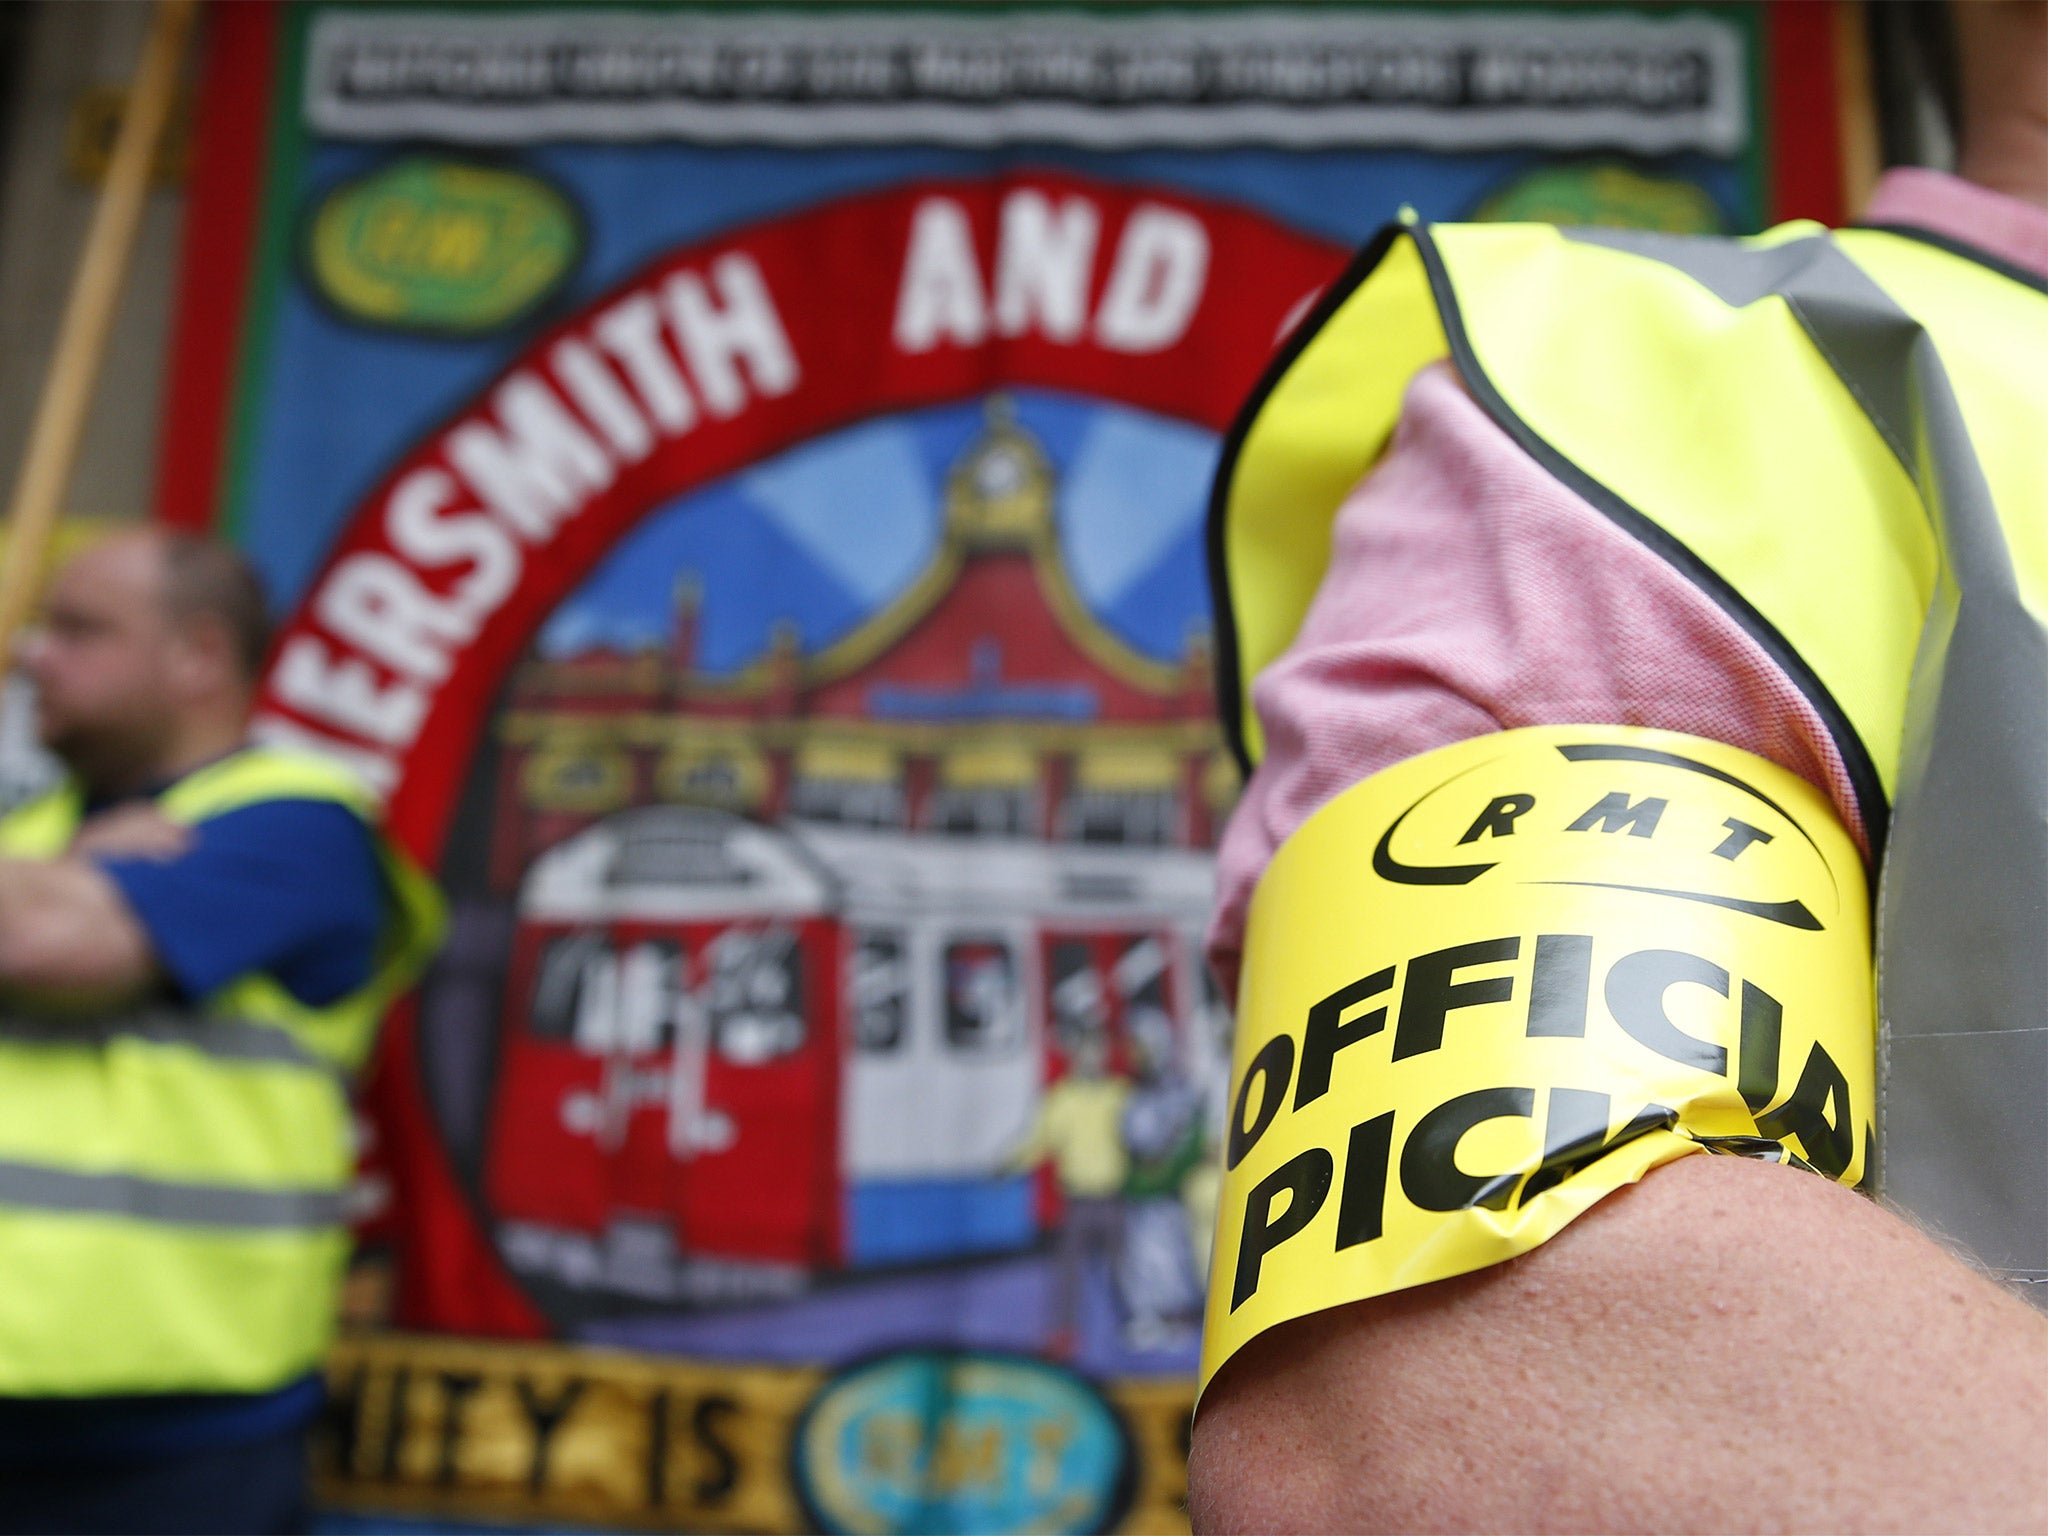 An RMT union member wears an official picket arm band outside Paddington Station